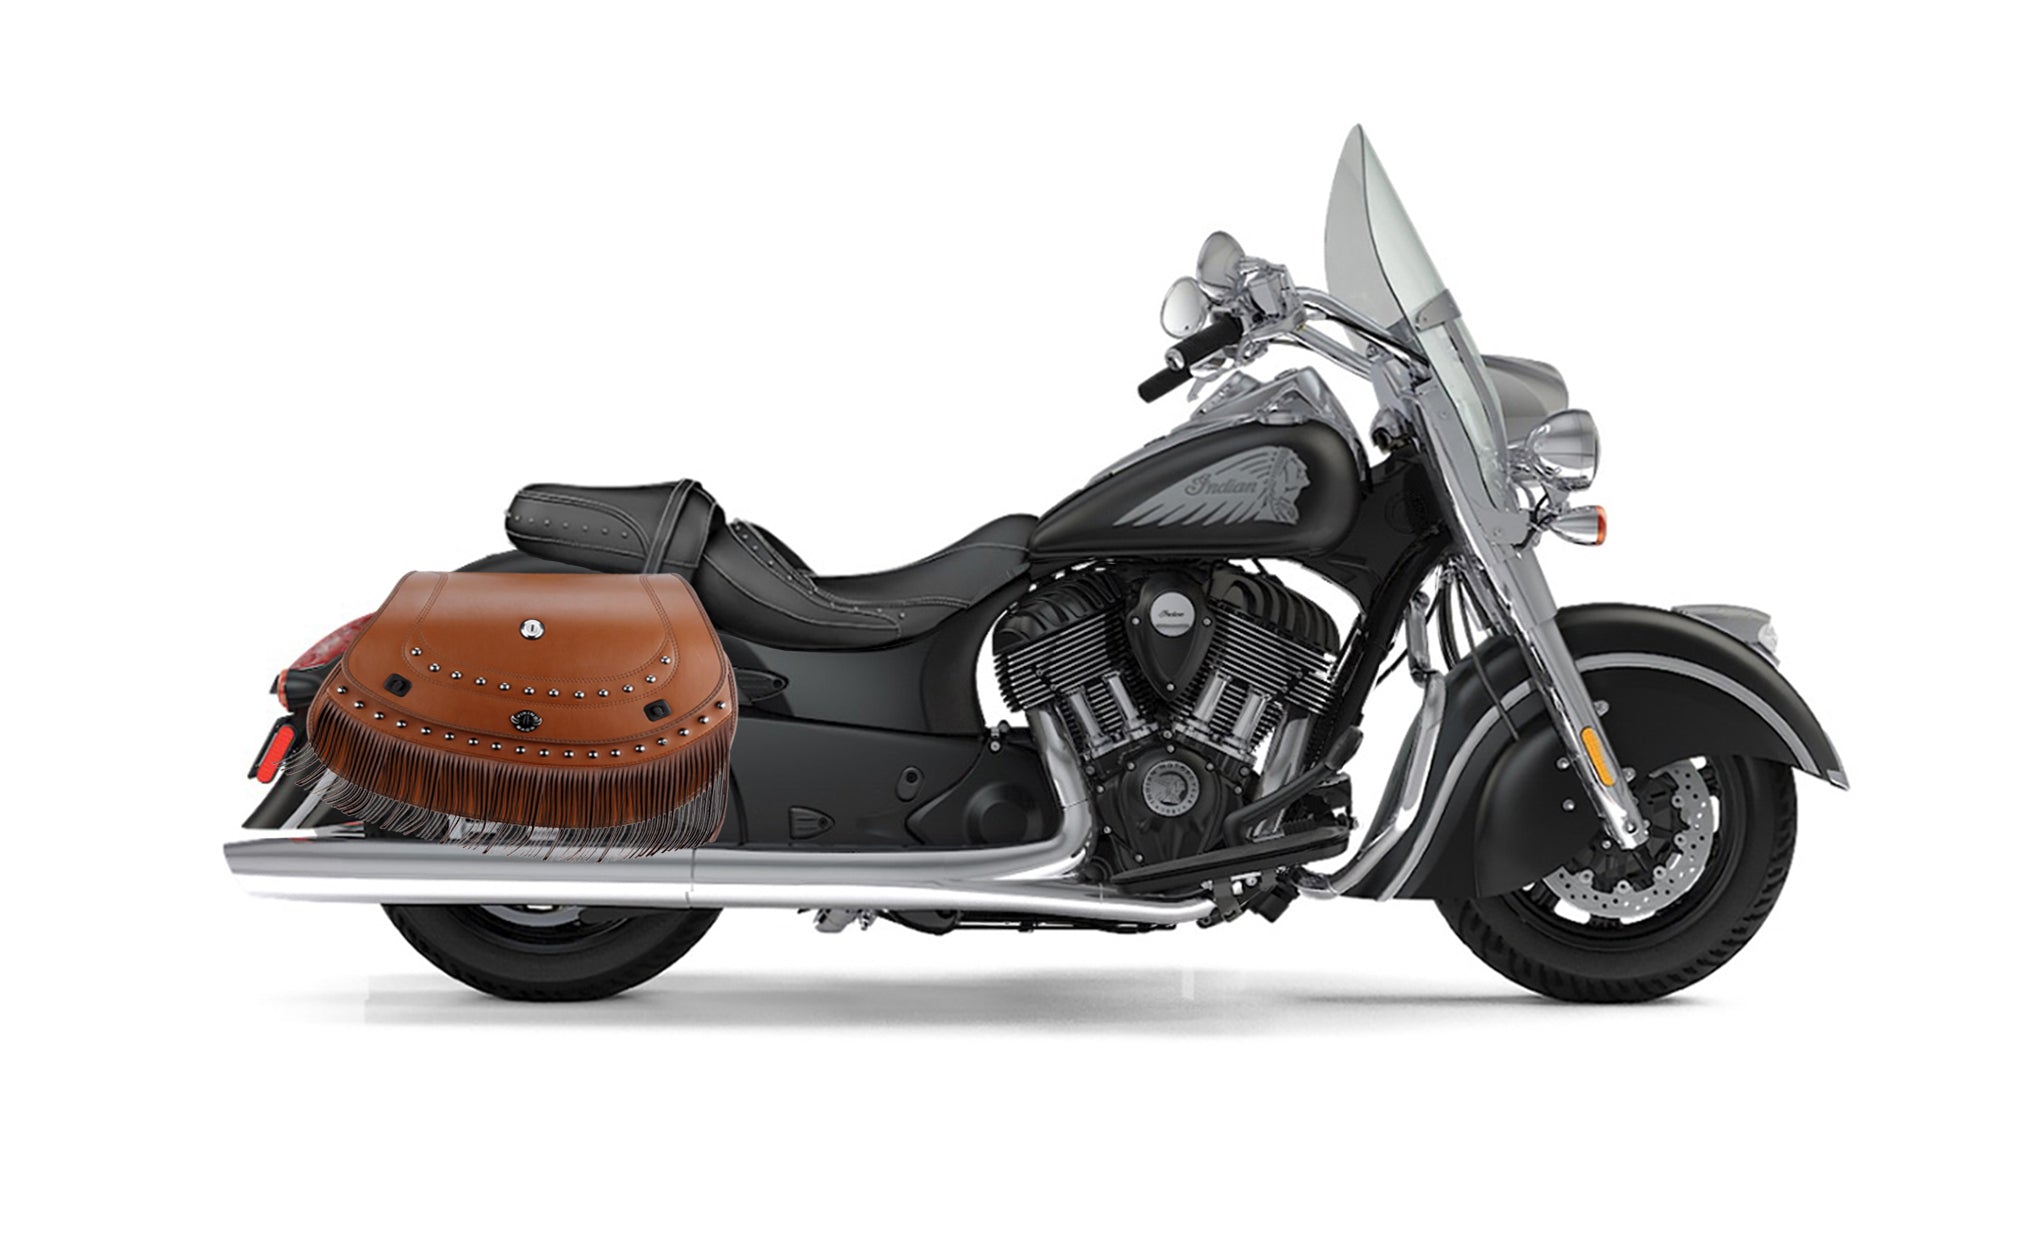 Viking Mohawk Brown Extra Large Indian Springfield Specific Leather Motorcycle Saddlebags on Bike Photo @expand